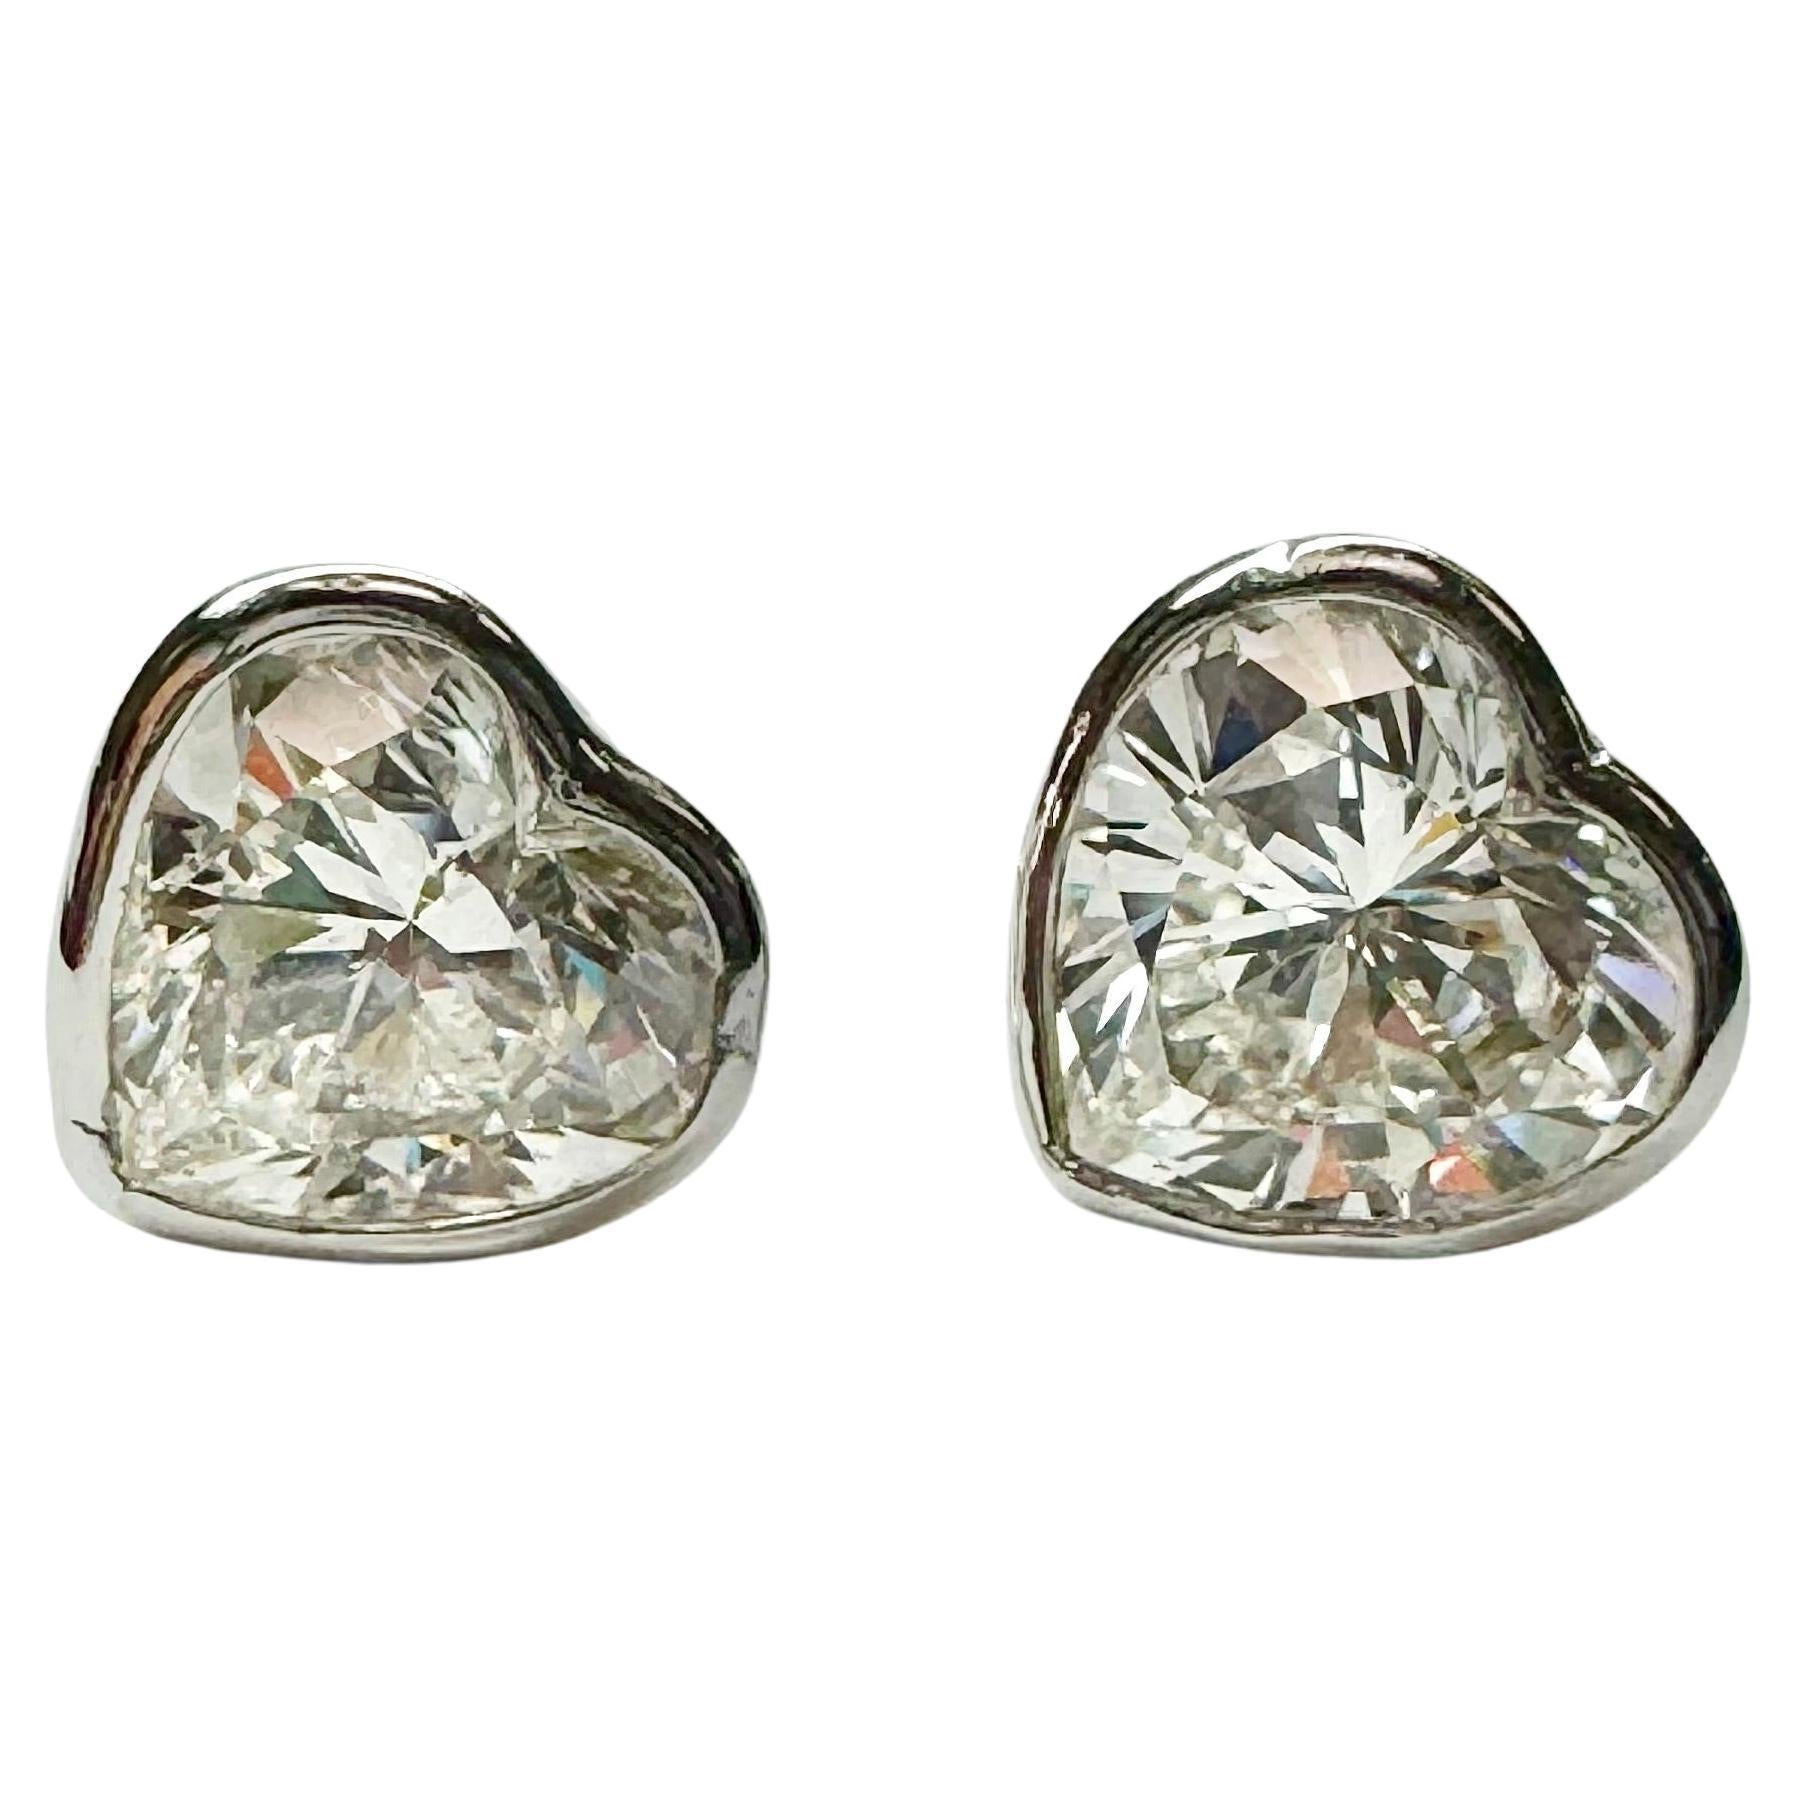 Unique Heart shape pair of diamond earring studs, set in custom handmade Tiffany & Co. platinum mounting. 
Beautifully matched white diamonds, with no dark inclusions. 
Diamonds are accompanied with GIA reports
GIA2225298893 2.02 H SI2
GIA5222298892